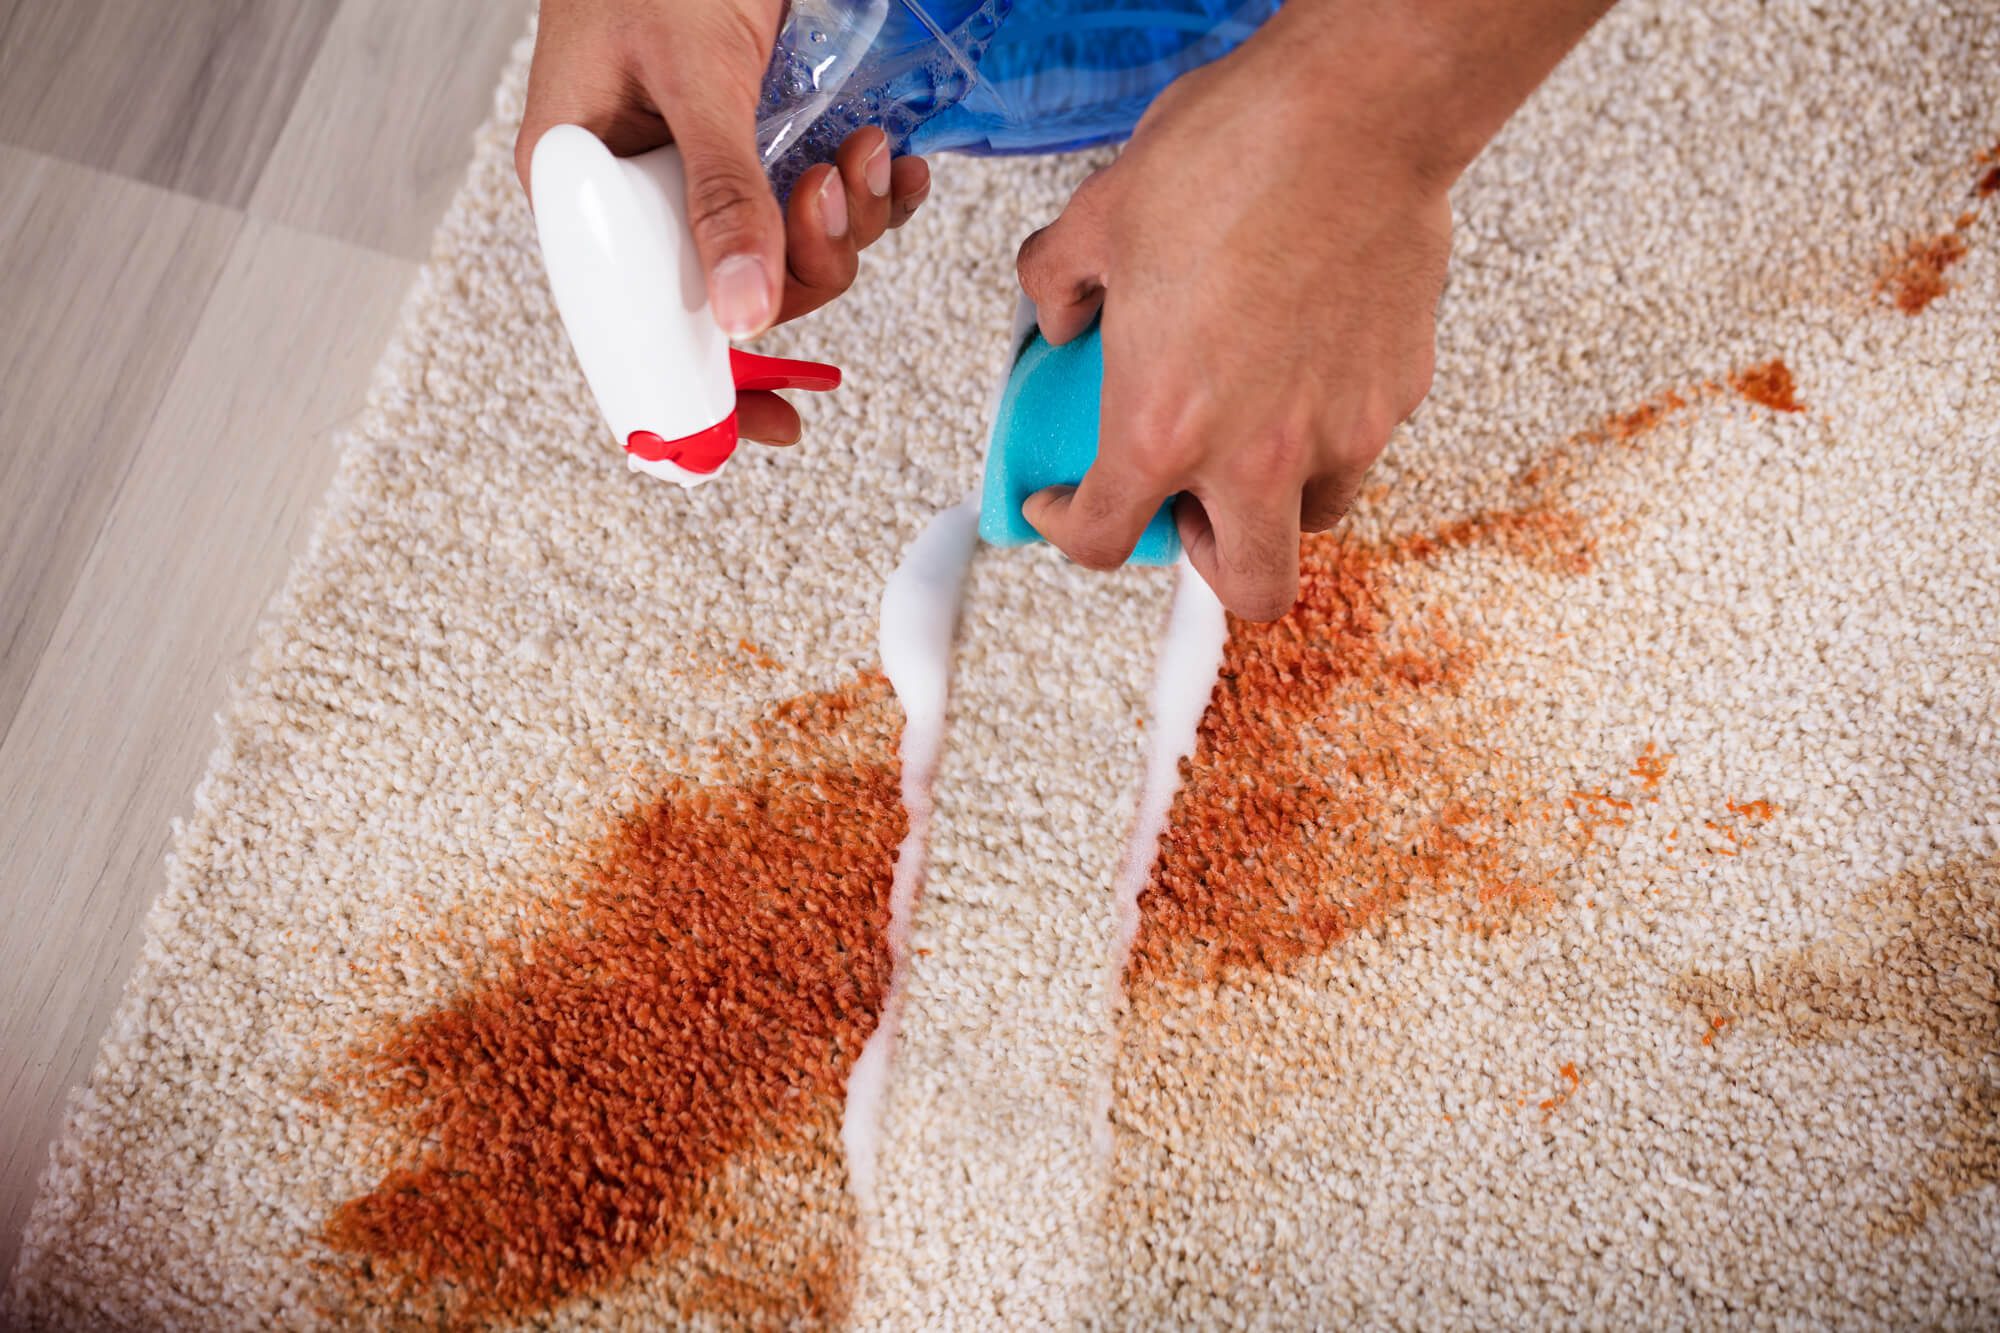 Carpet cleaning services for home and business owners in Maryland